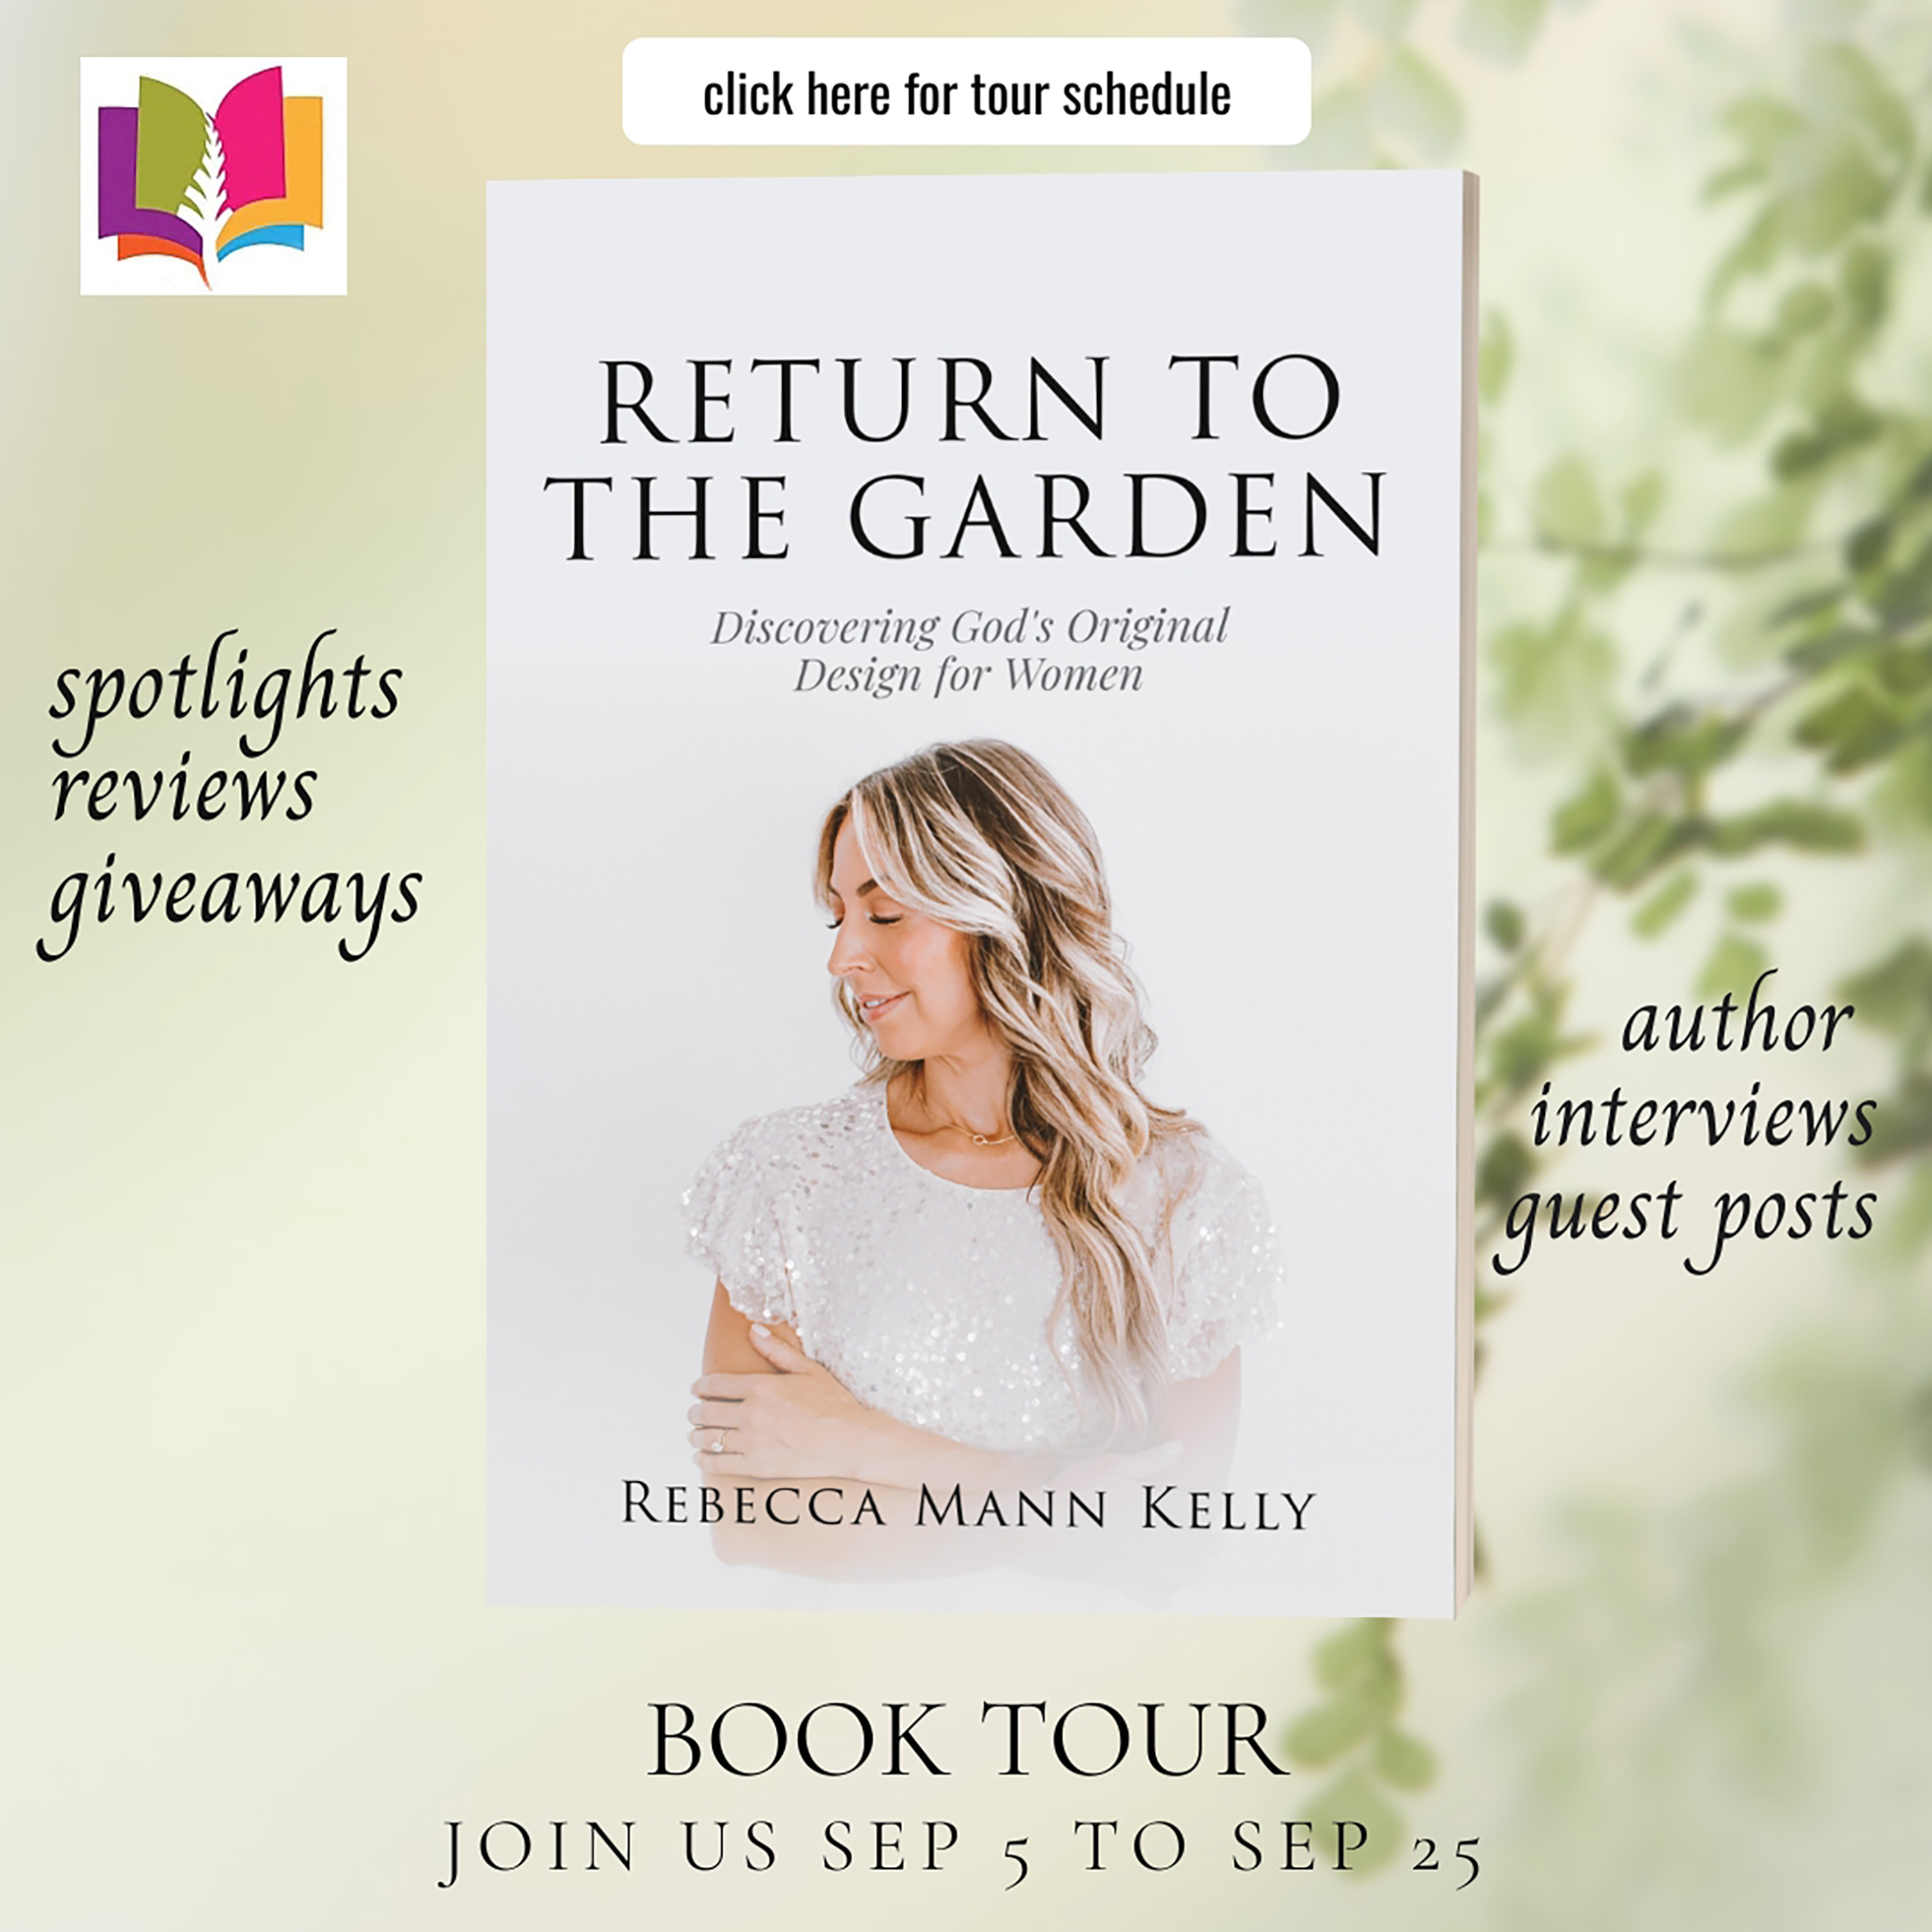 Return to the Garden: Discovering God's Original Design for Women by Rebecca Mann Kelly | Spotight ~ $25 Giveaway ~ Author Guest Post | @iReadBookTours #Christian Living #Spiritual Growth